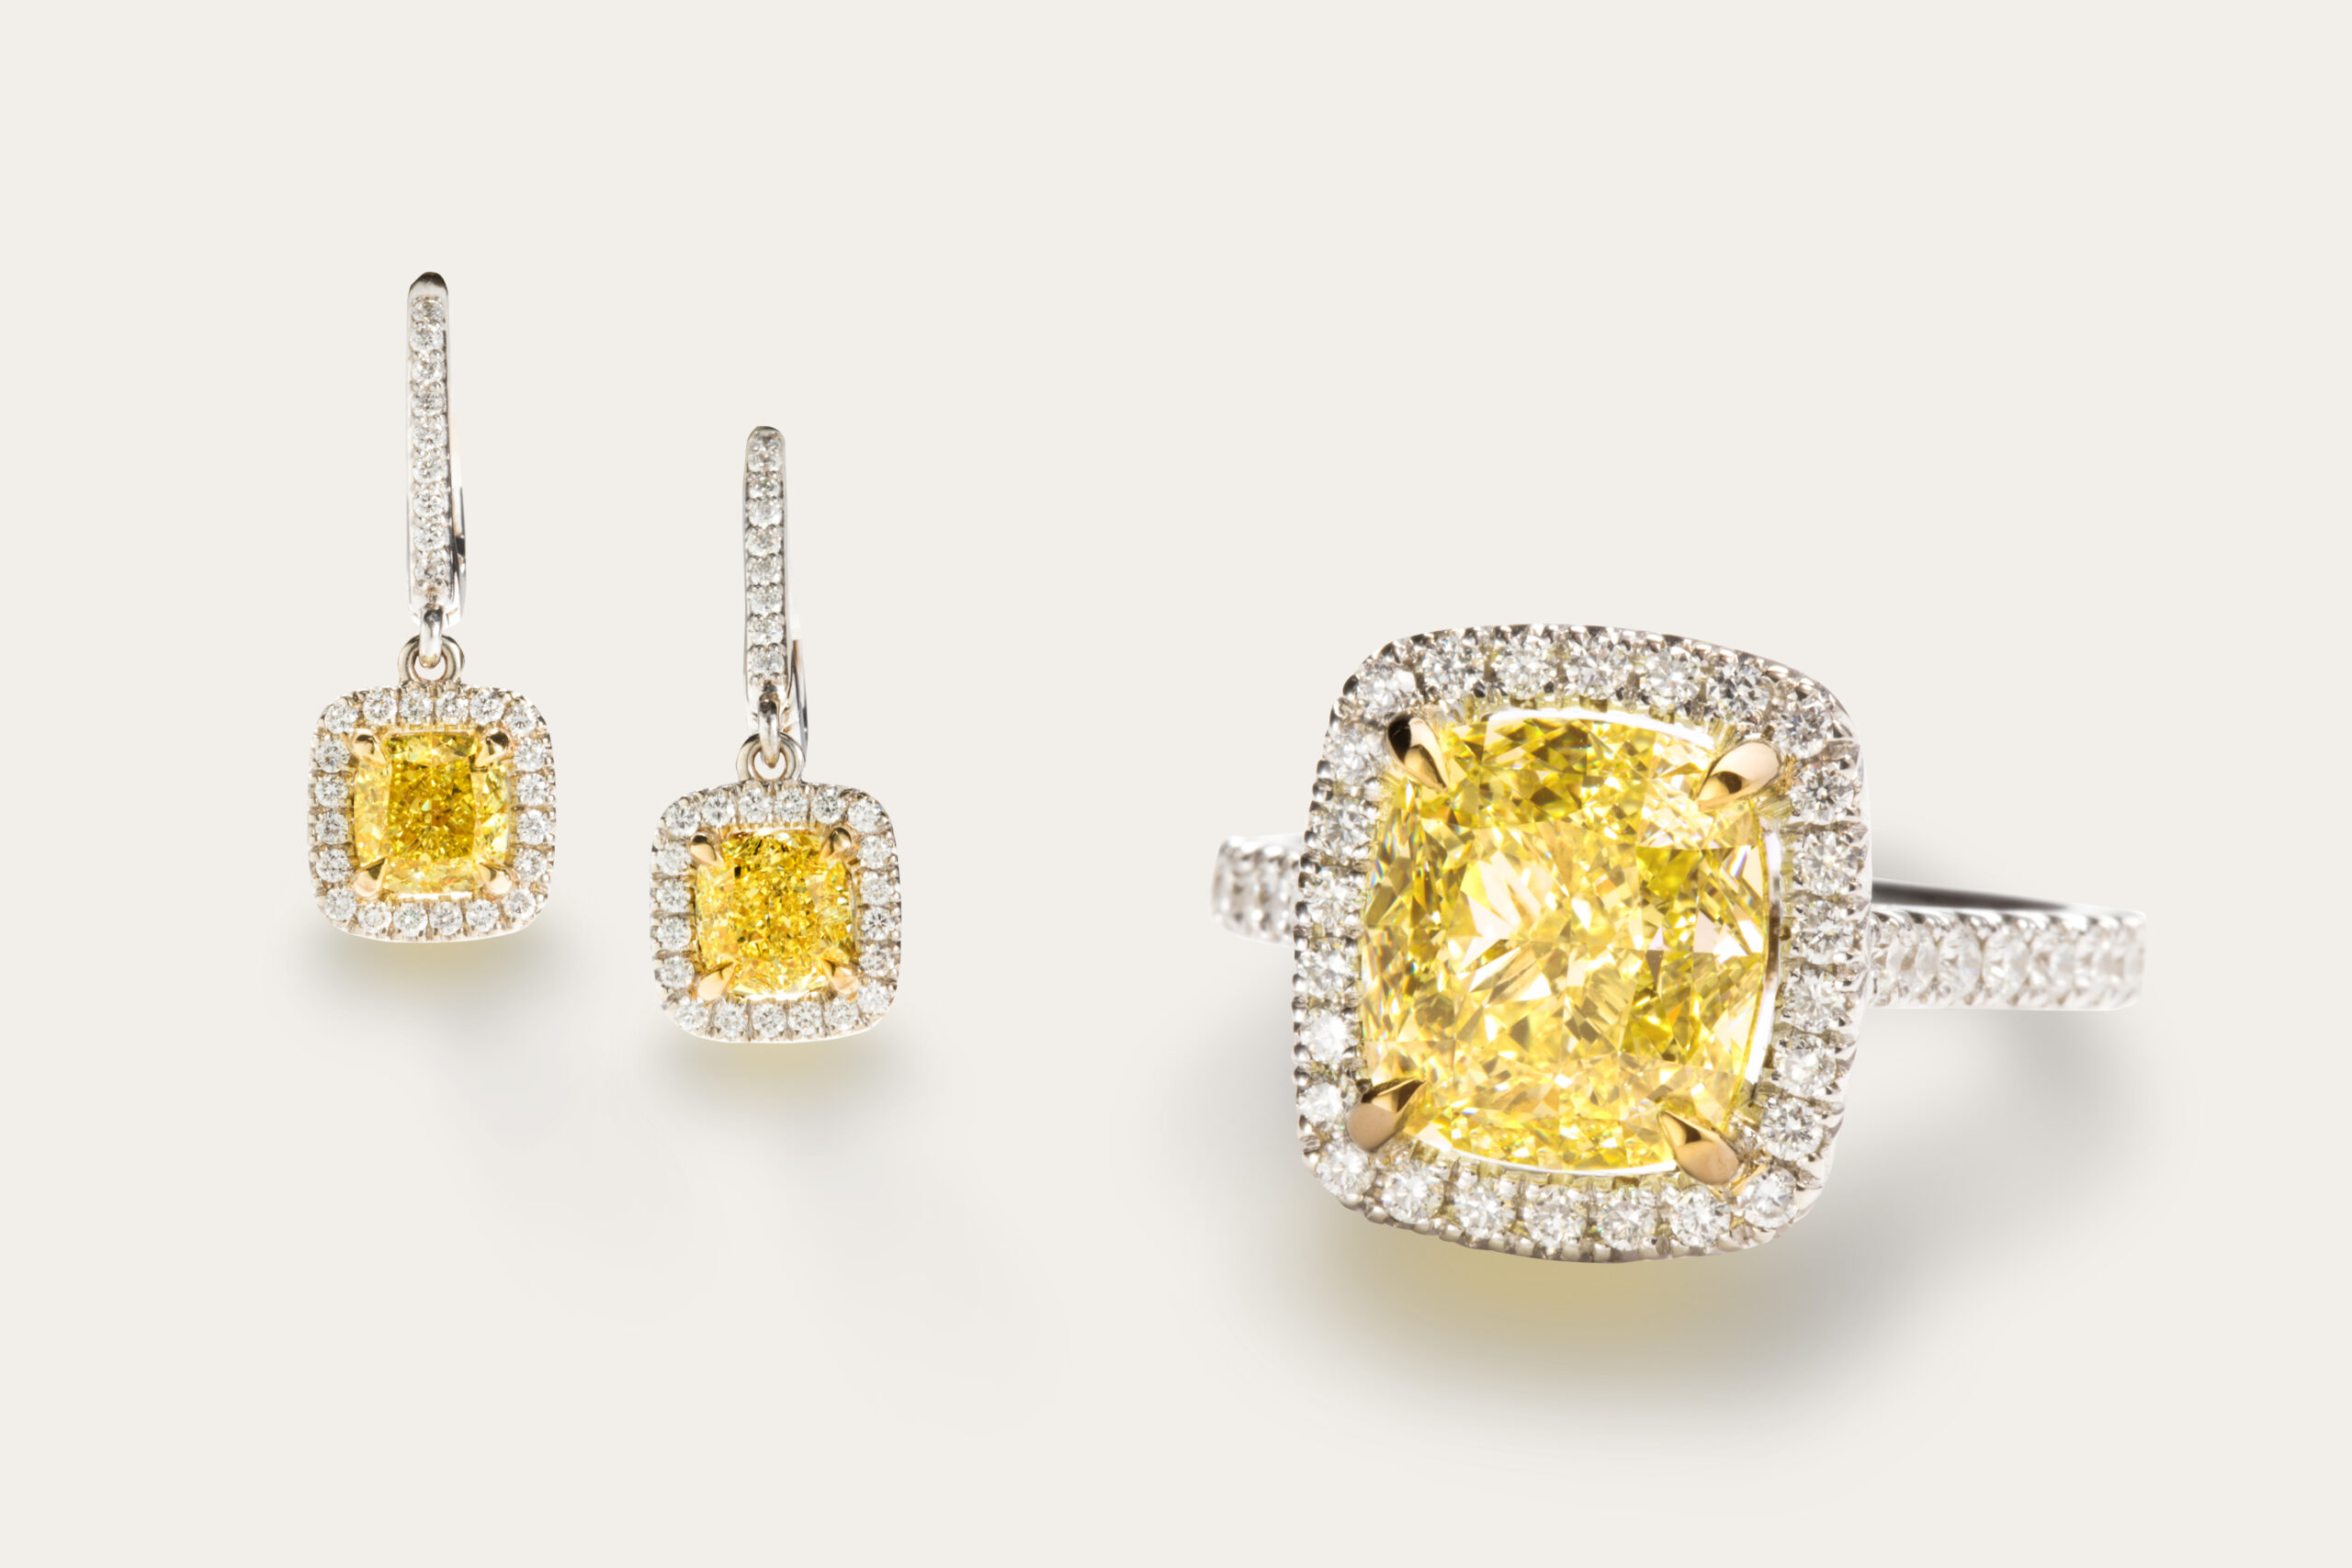 Left: A pair of fancy intense yellow diamond, diamond and 14k white gold earrings. Right: A fancy yellow diamond, diamond and 14k white gold ring.